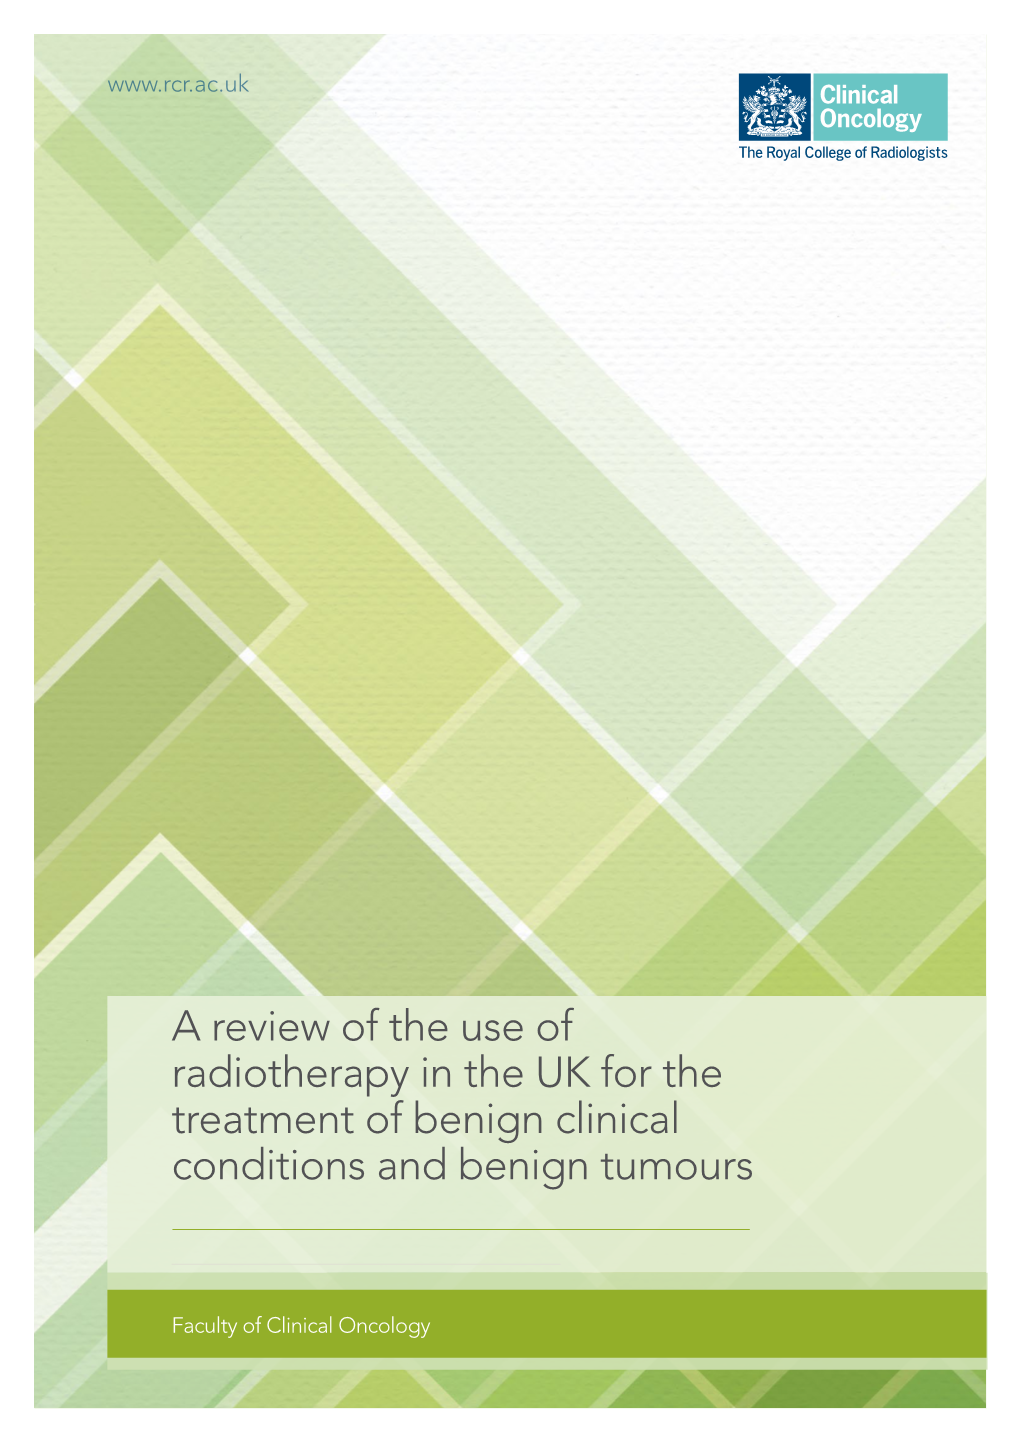 A Review of the Use of Radiotherapy in the UK for the Treatment of Benign Clinical Conditions and Benign Tumours